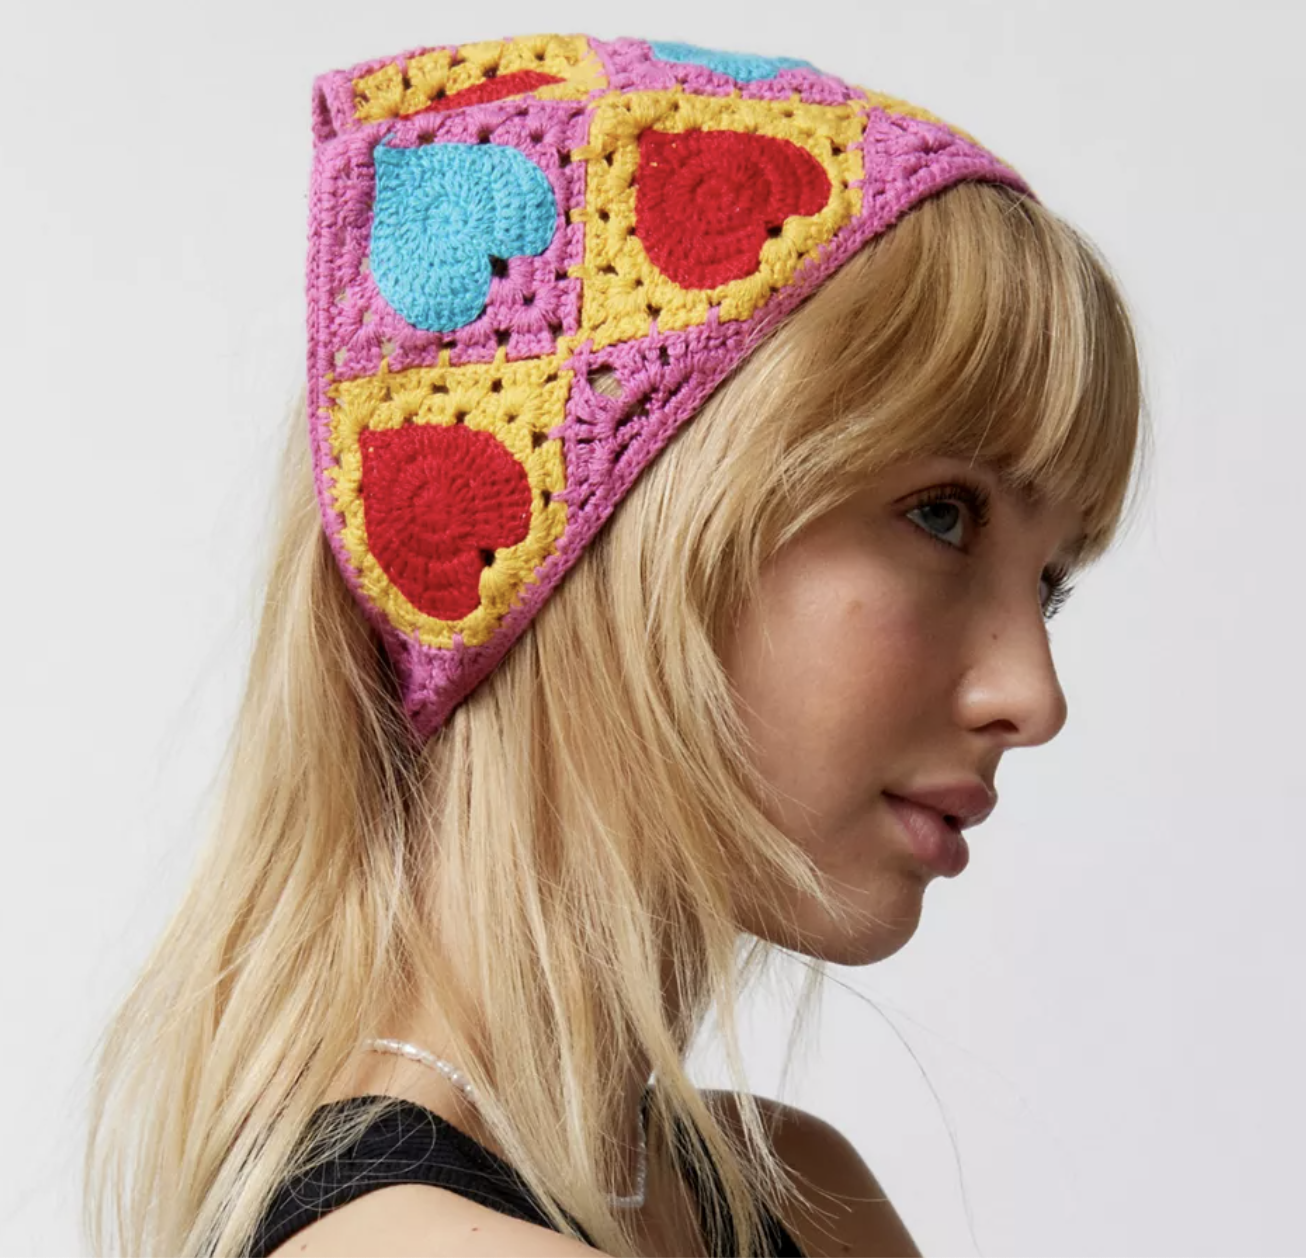 A model wearing the bandana in their hair in front of a plain background